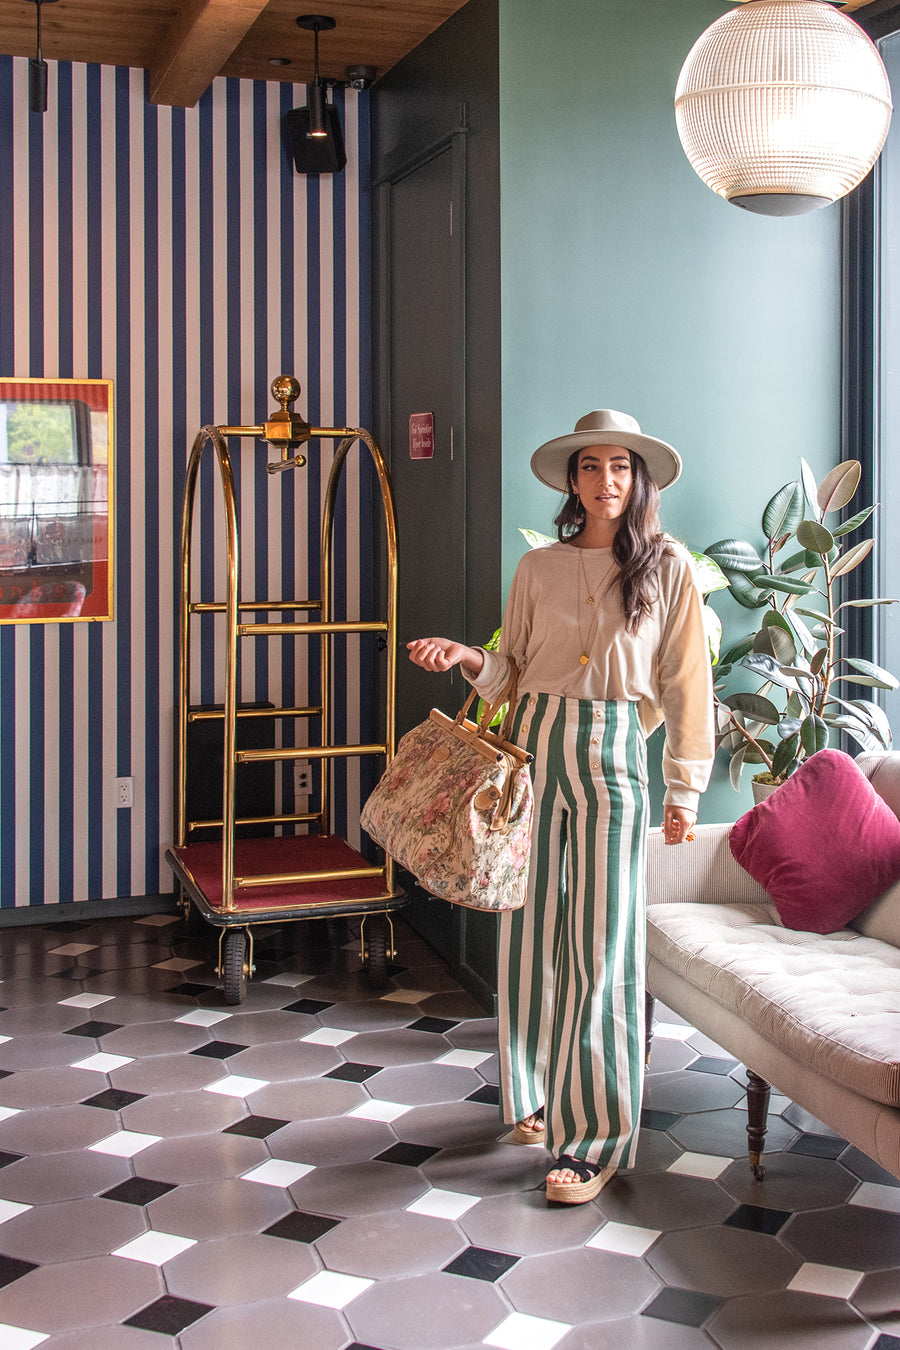 This is a photo of a woman wearing a white wide-brimmed hat and high waisted green and white striped wide leg pants with gold buttons. She is standing in a hotel lobby holding a floral tote.